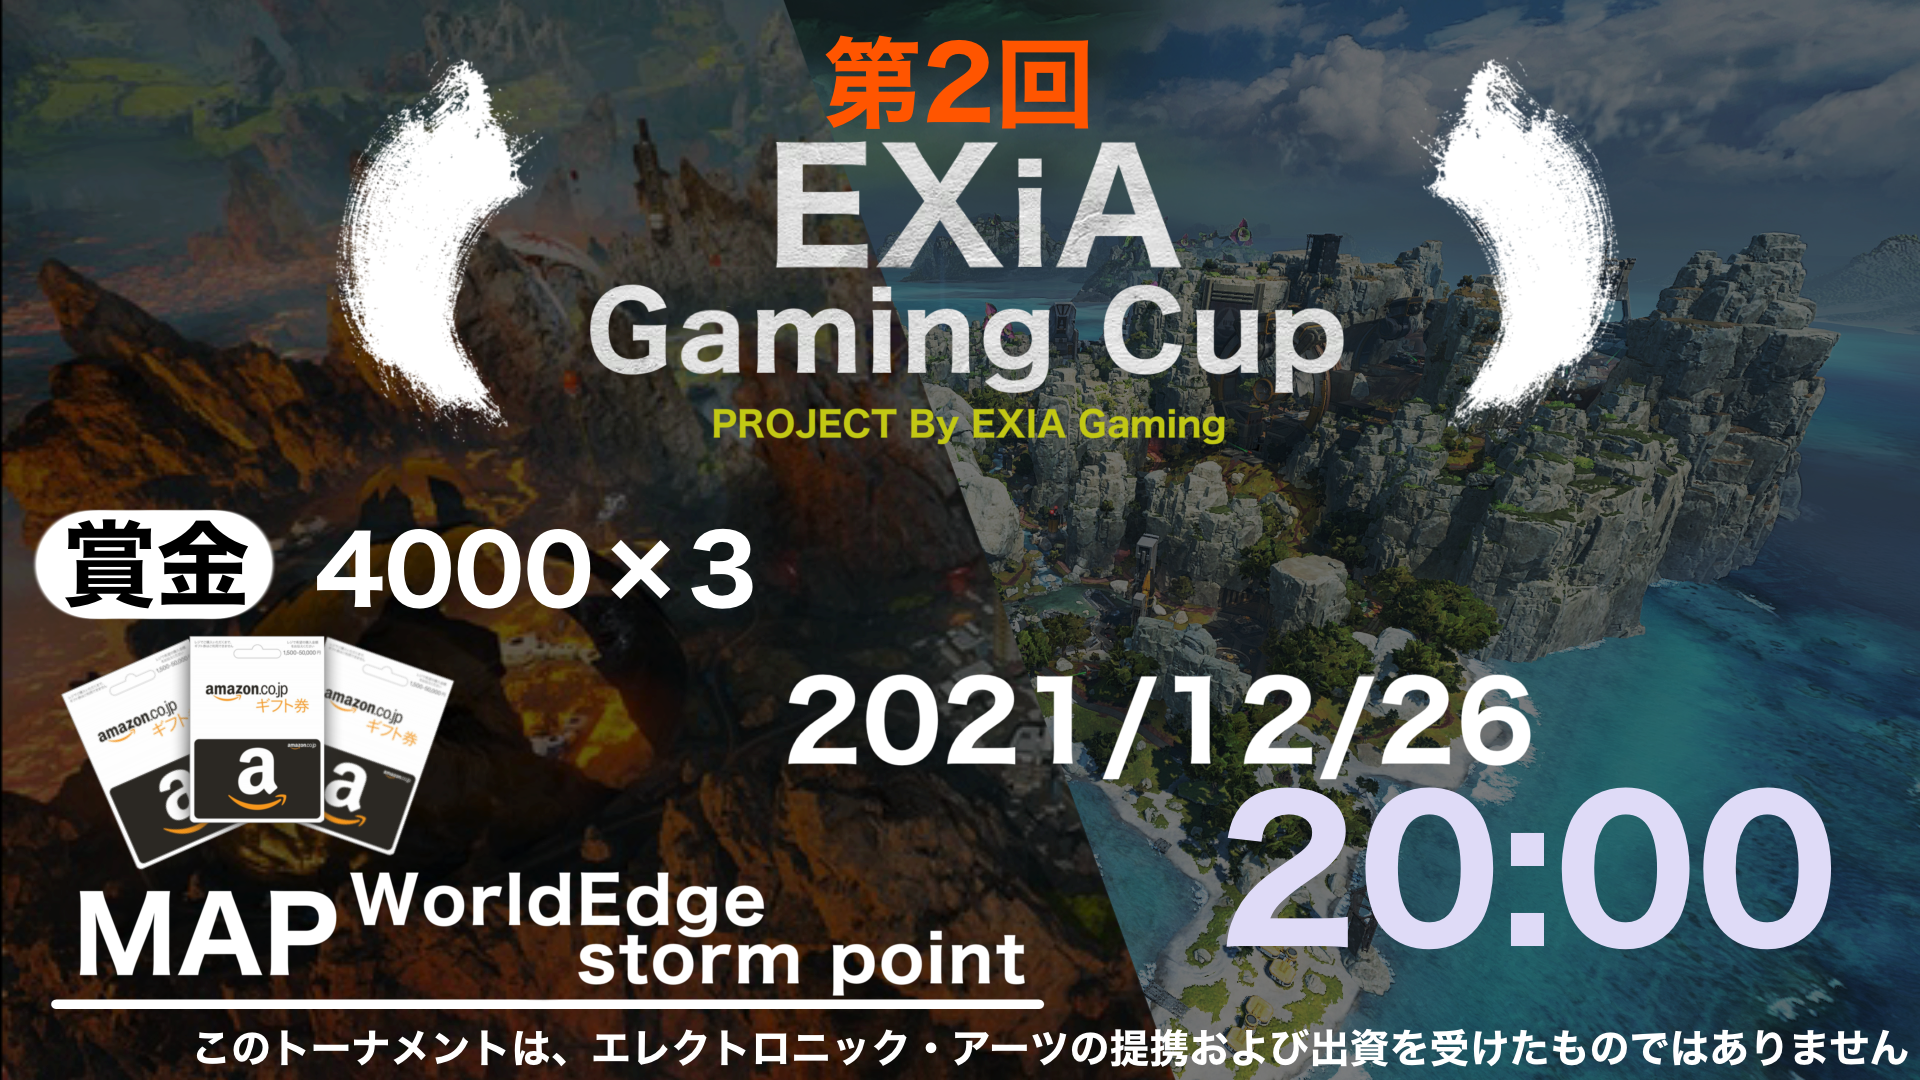 EXiA Gaming Cup #2